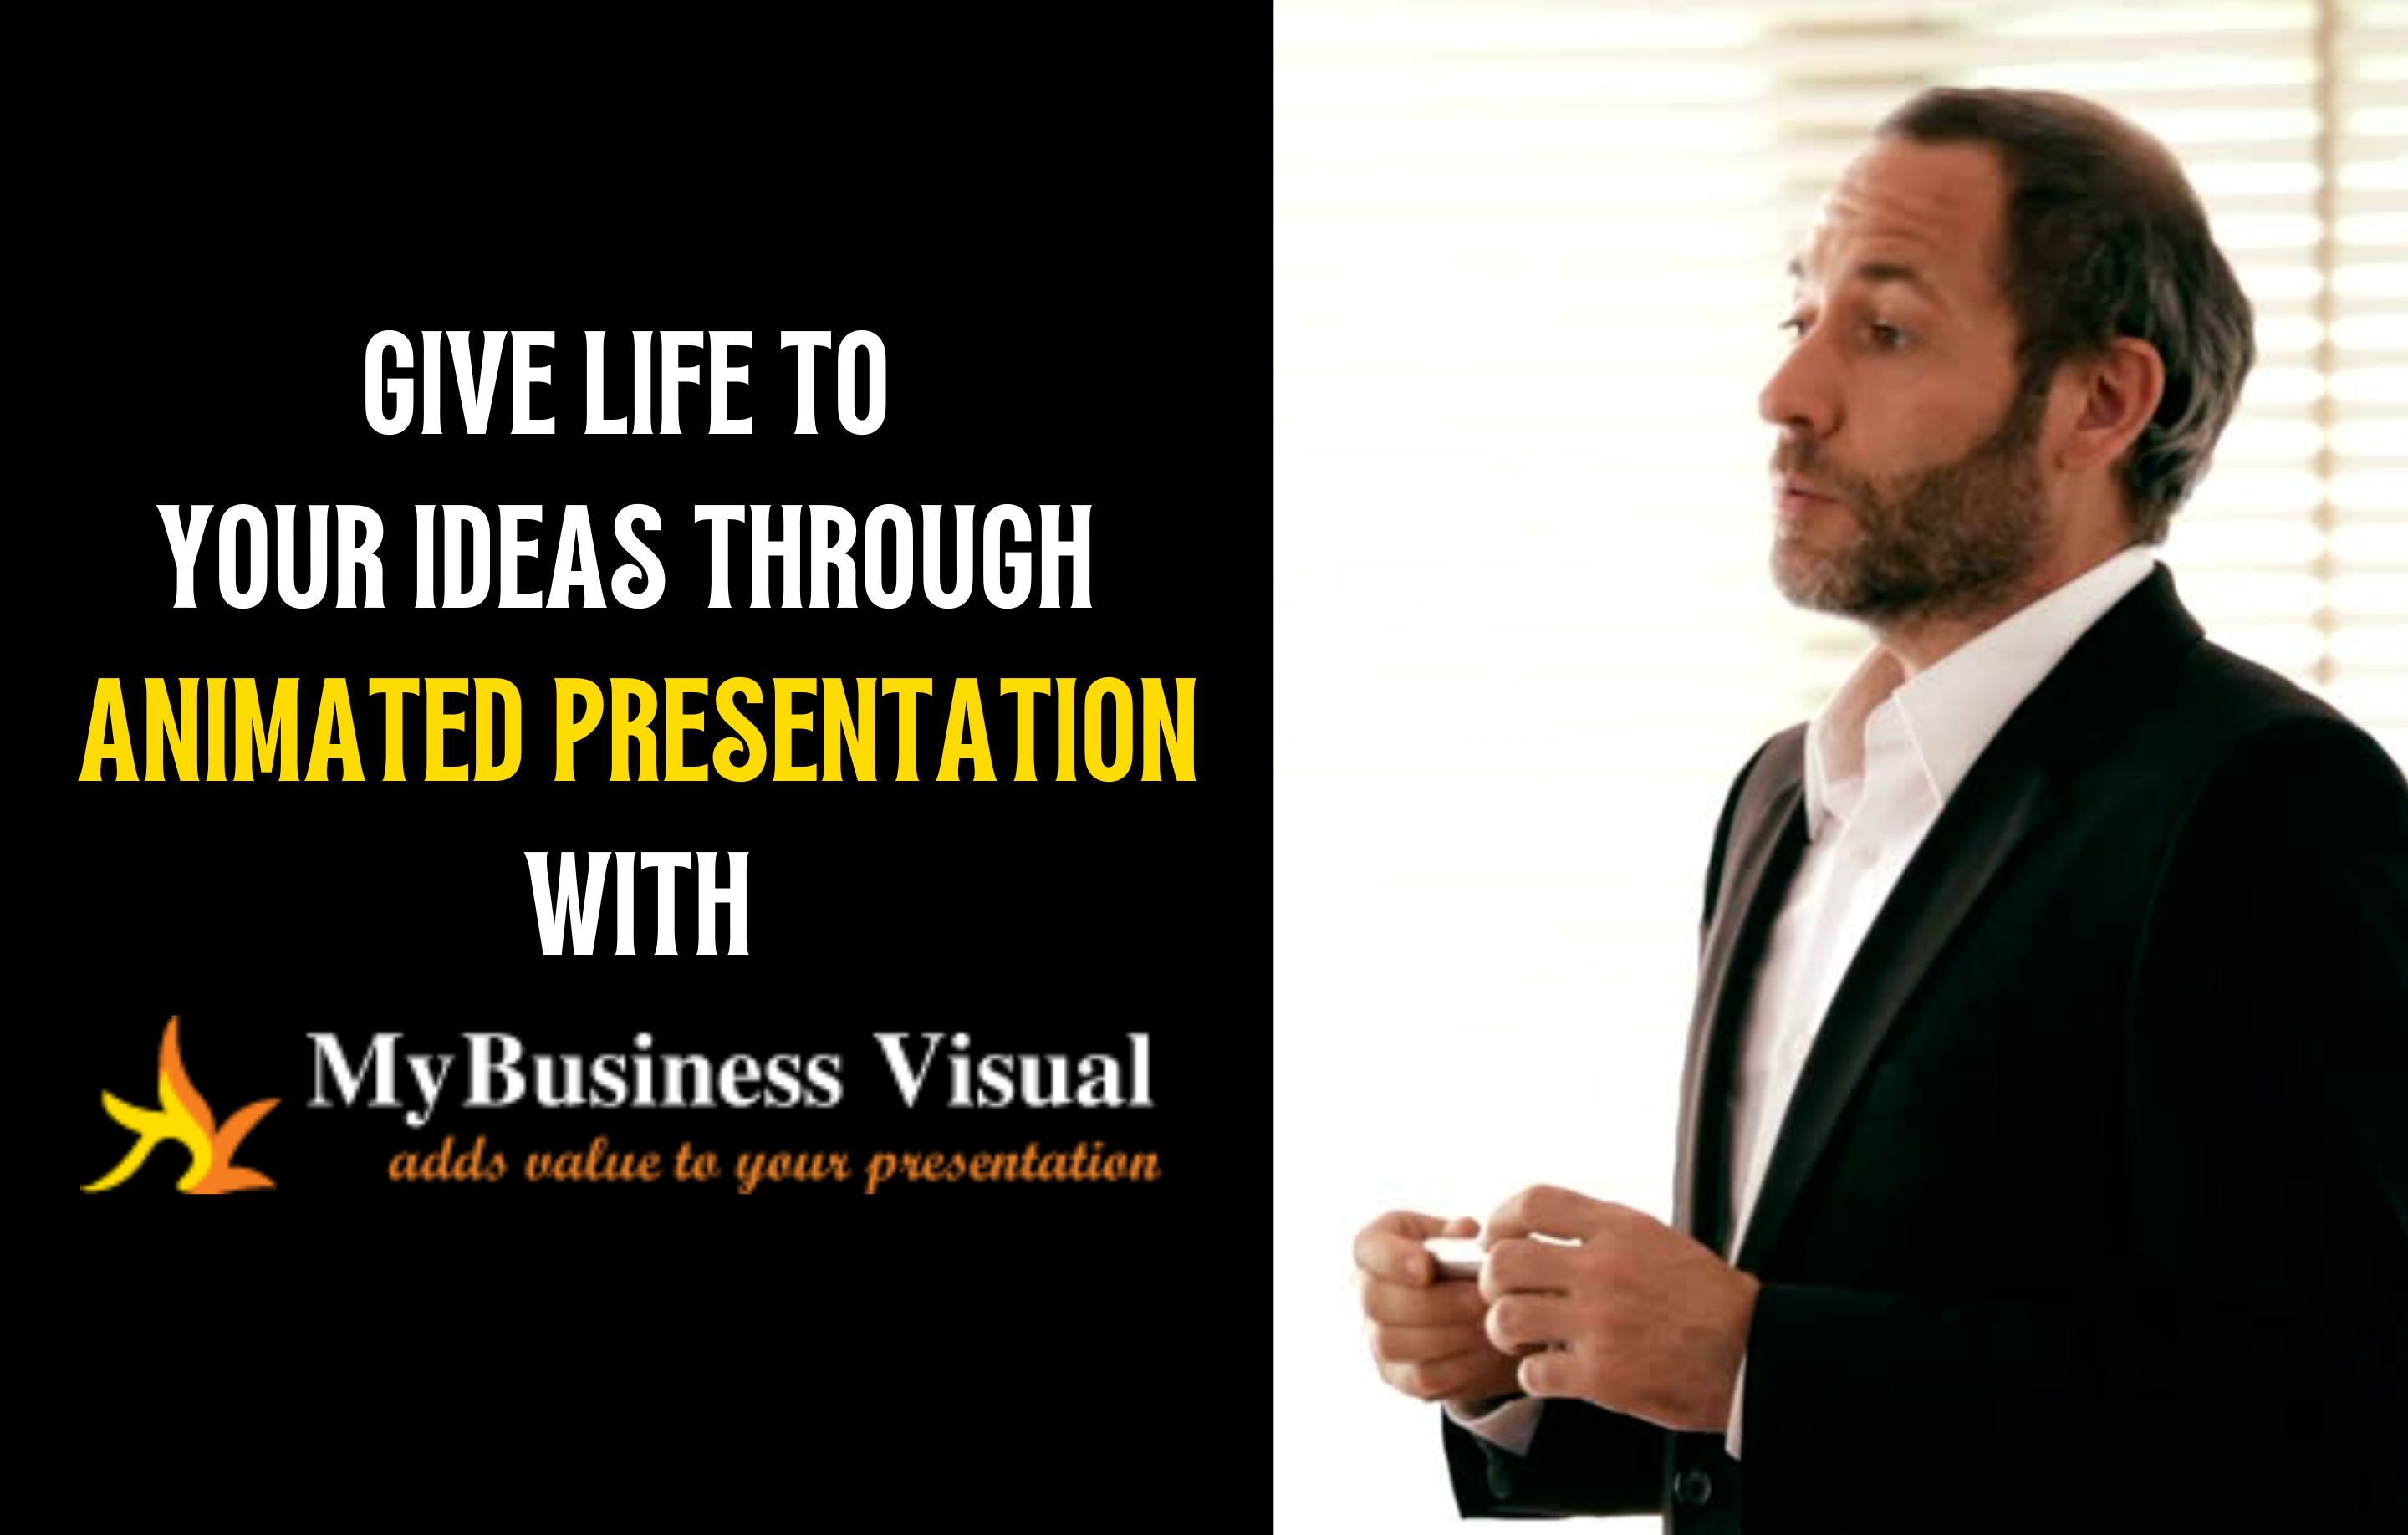 Give life to your ideas through animated presentation with Mybusiness Visual